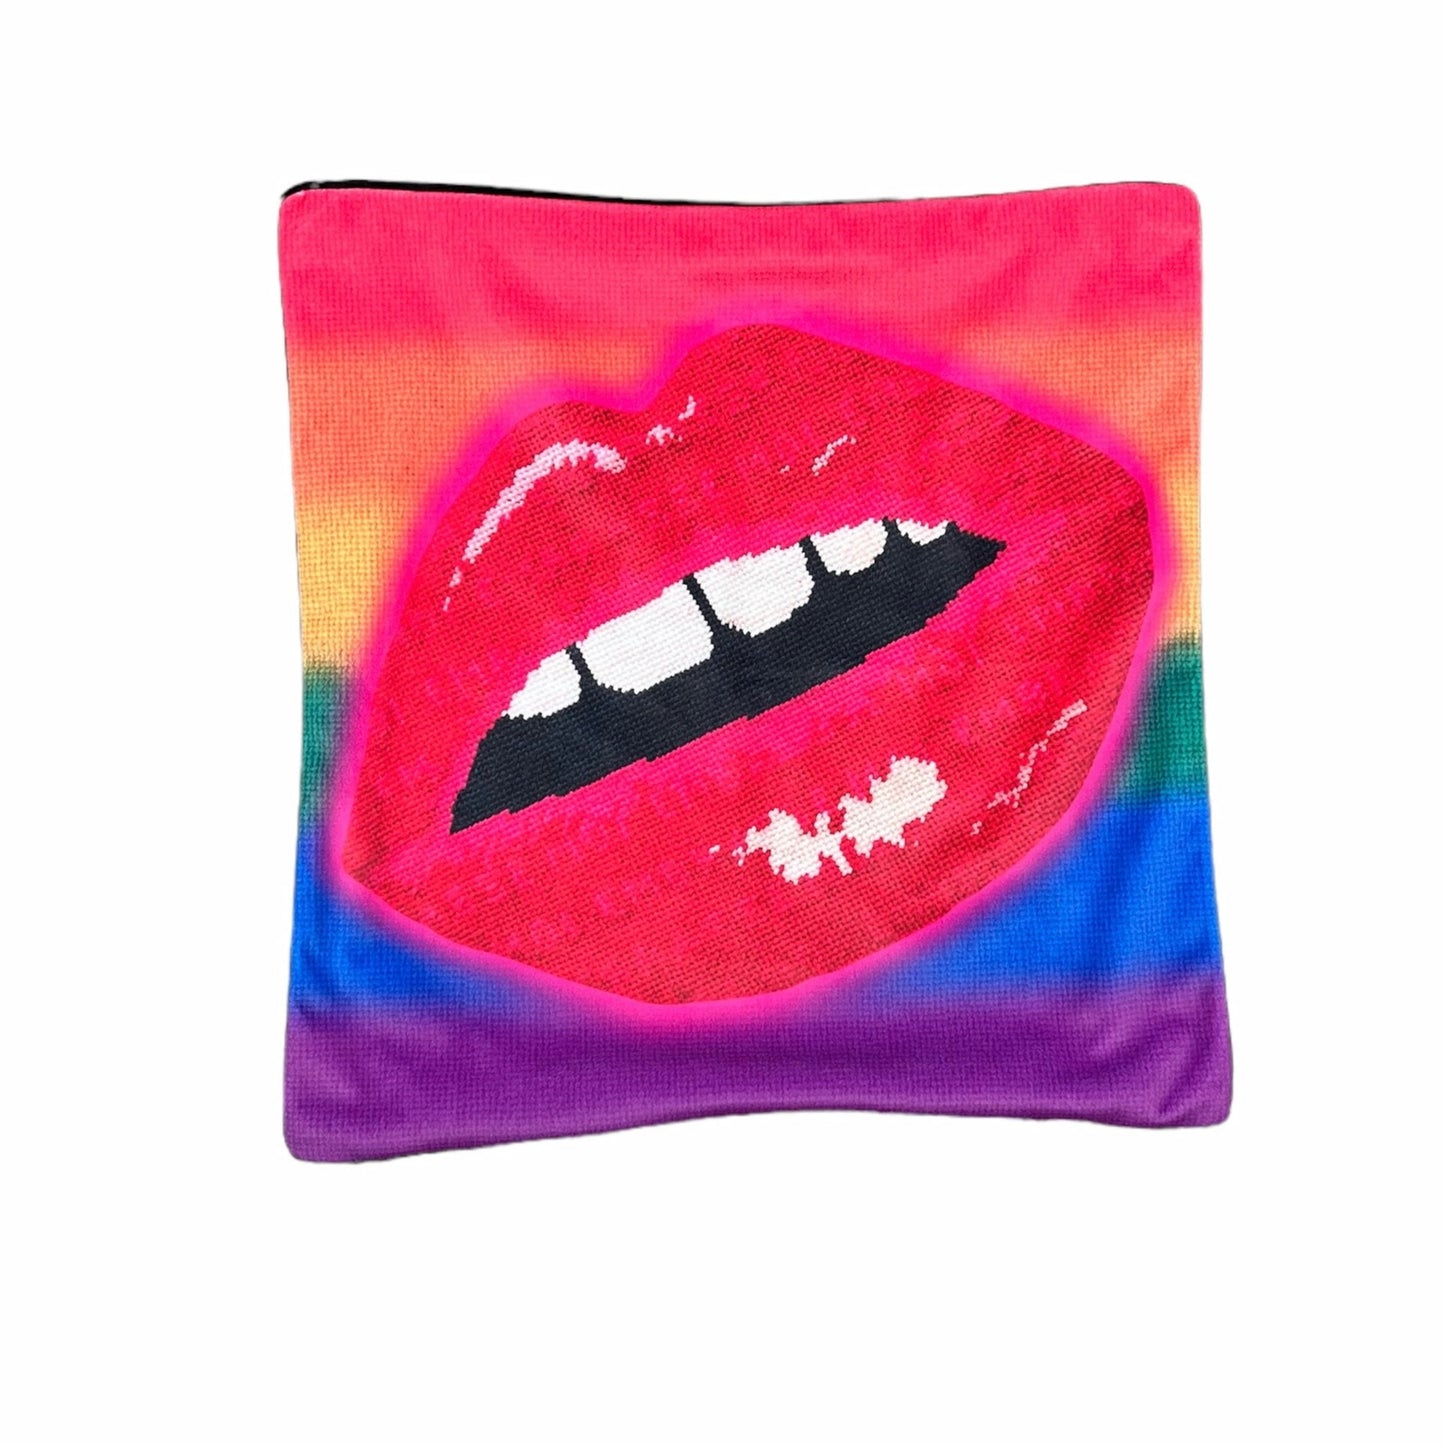 oversized pouty red lips are highlighted in neon pink with a rainbow background